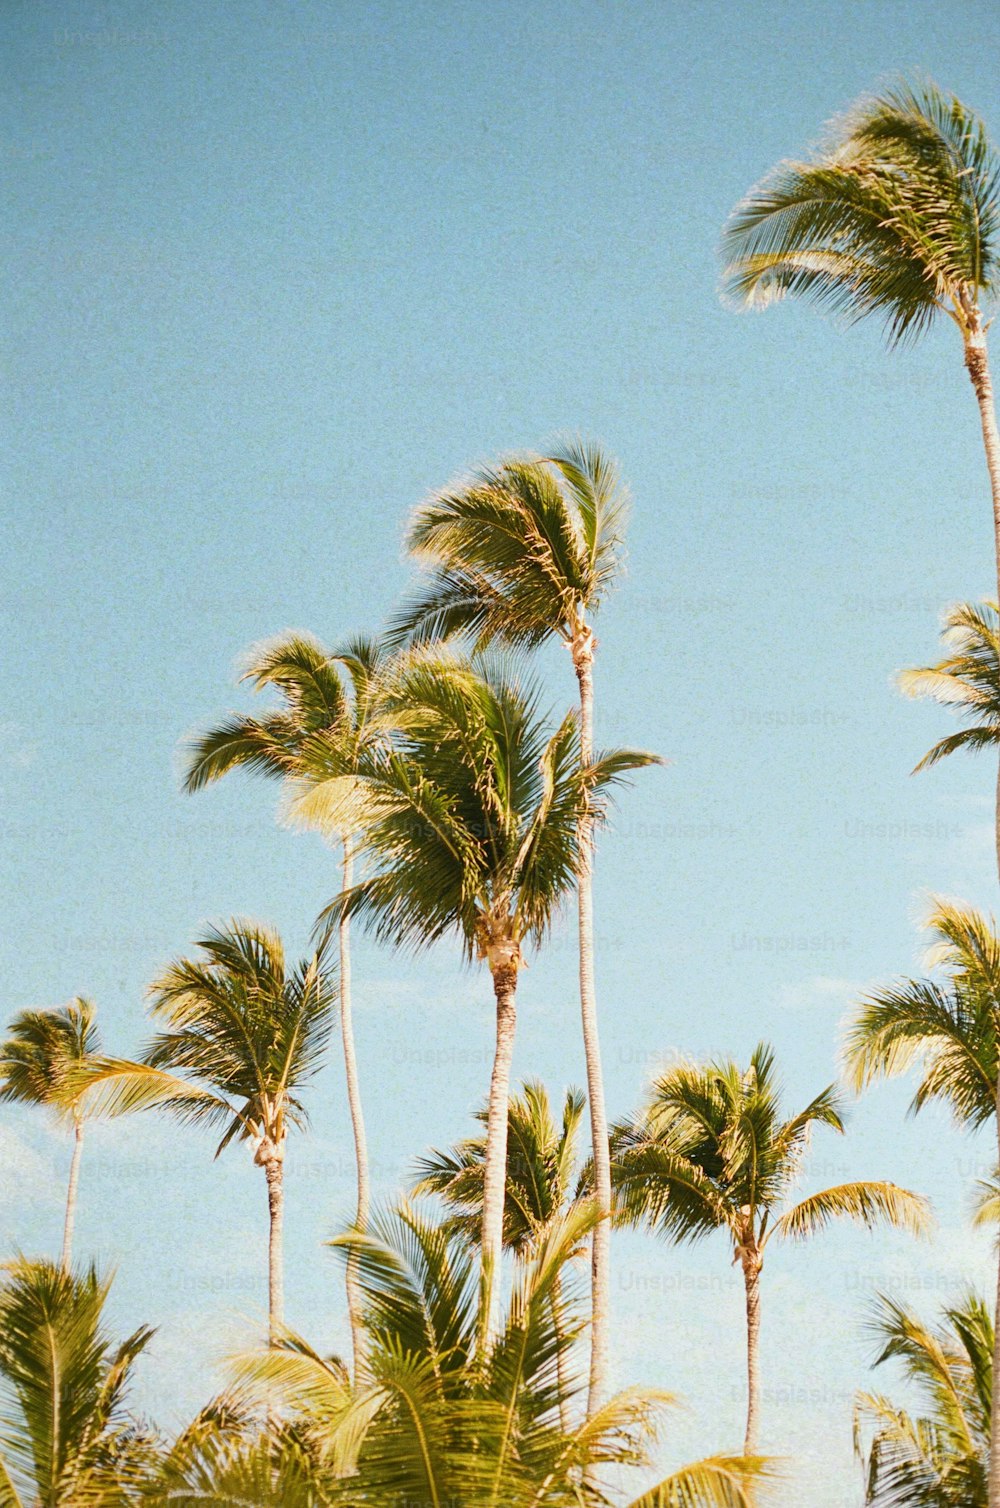 Summertime Pictures  Download Free Images on Unsplash